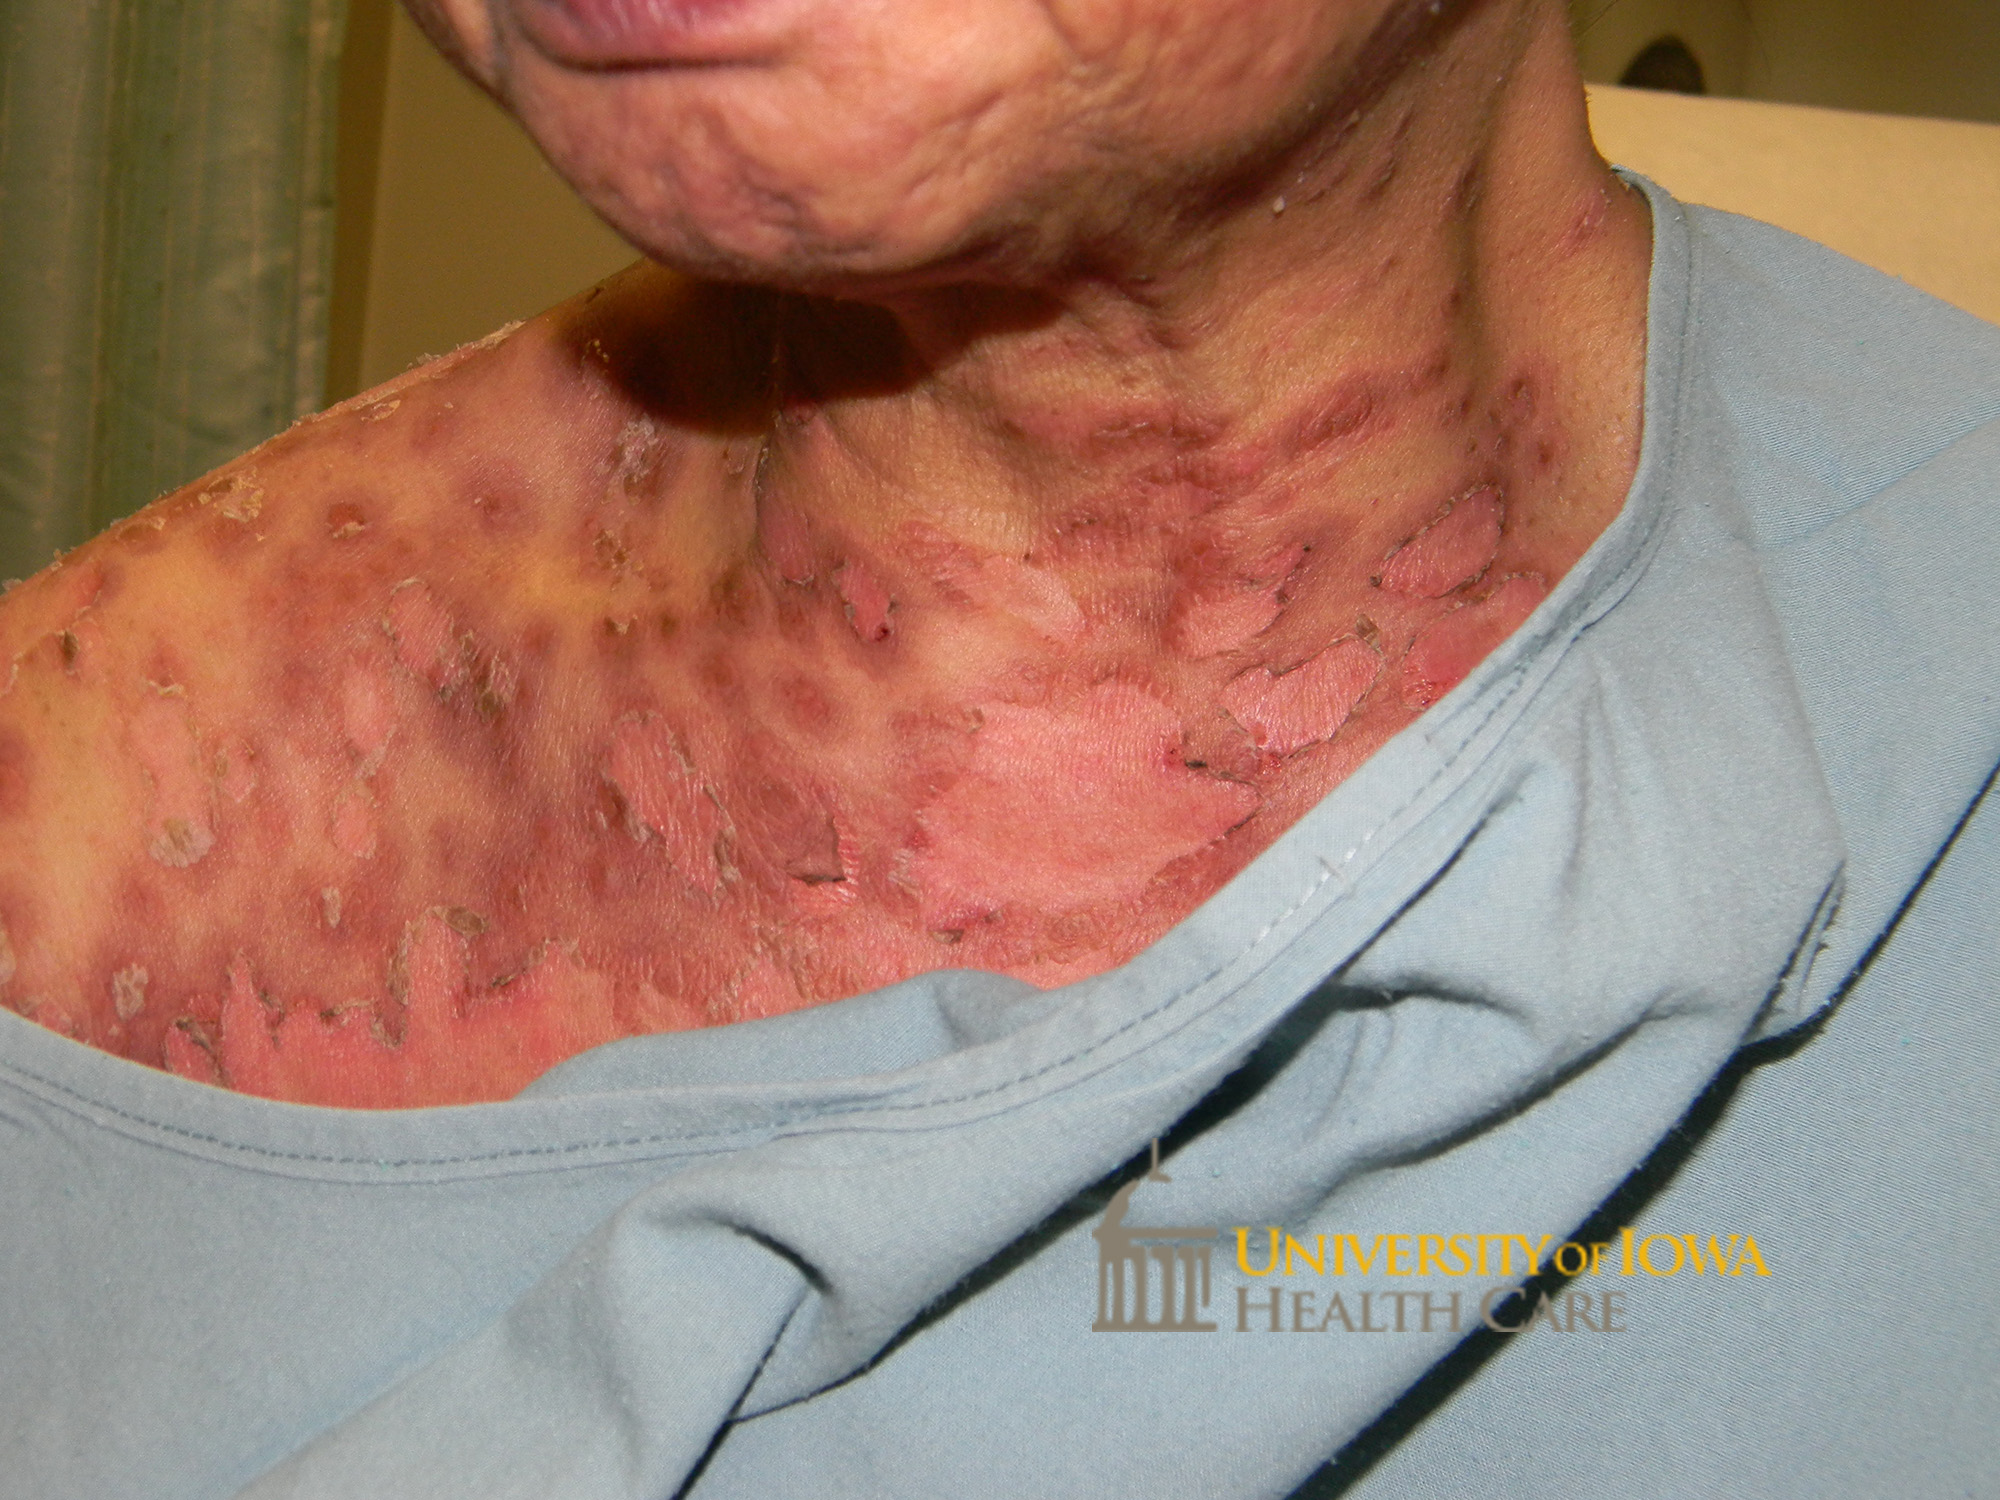 Superficial erosions and flacid bullae with surrounding erythema. (click images for higher resolution).